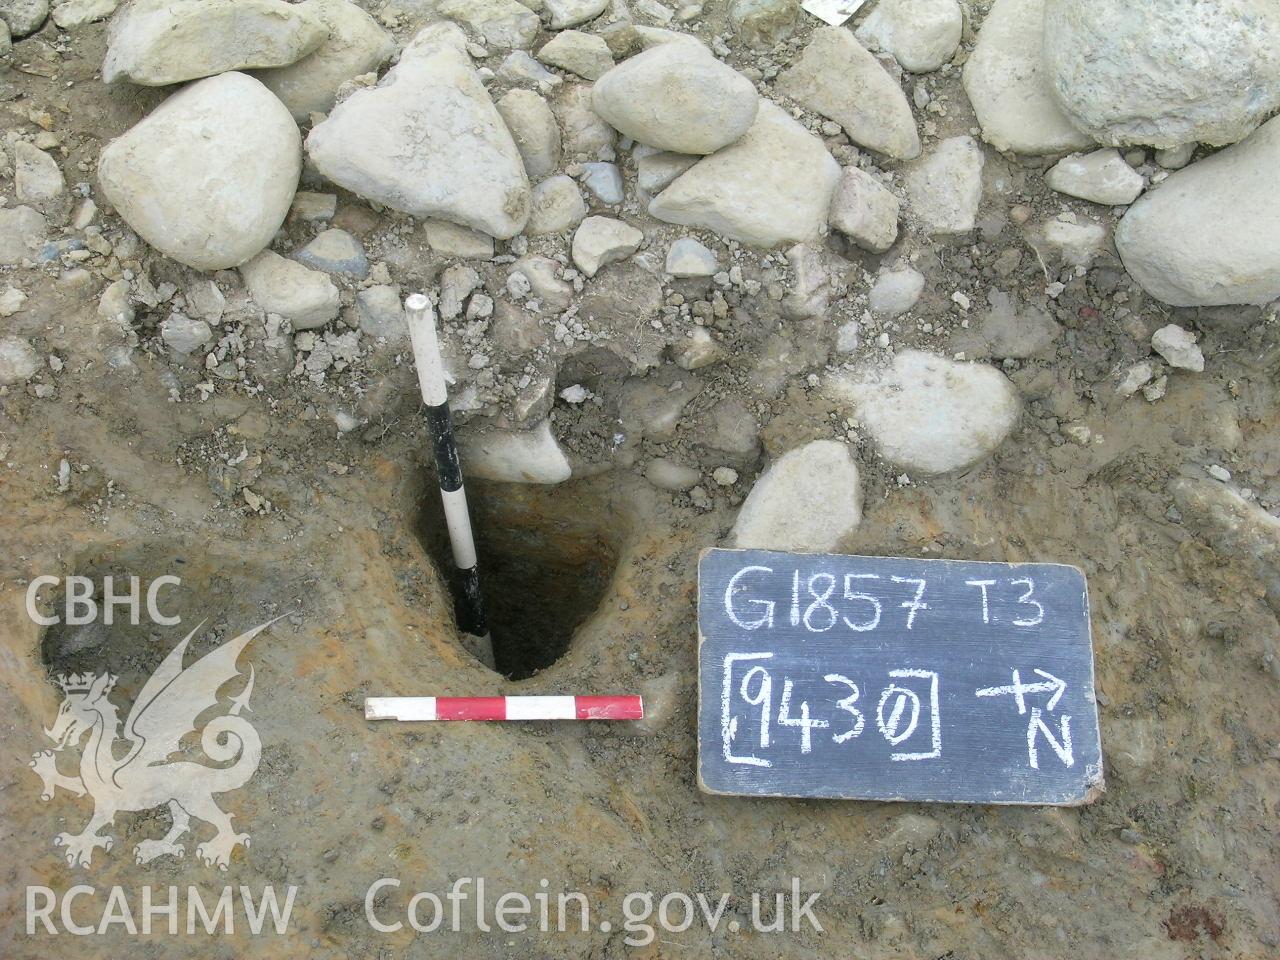 Digital photograph from excavation of Parc Bryn Cegin, Llandygai, by Gwynedd Archaeological Trust. Post-ex. [9430], from E (numbers refer to context records). Scale 1x0.5m, 1x0.2m.